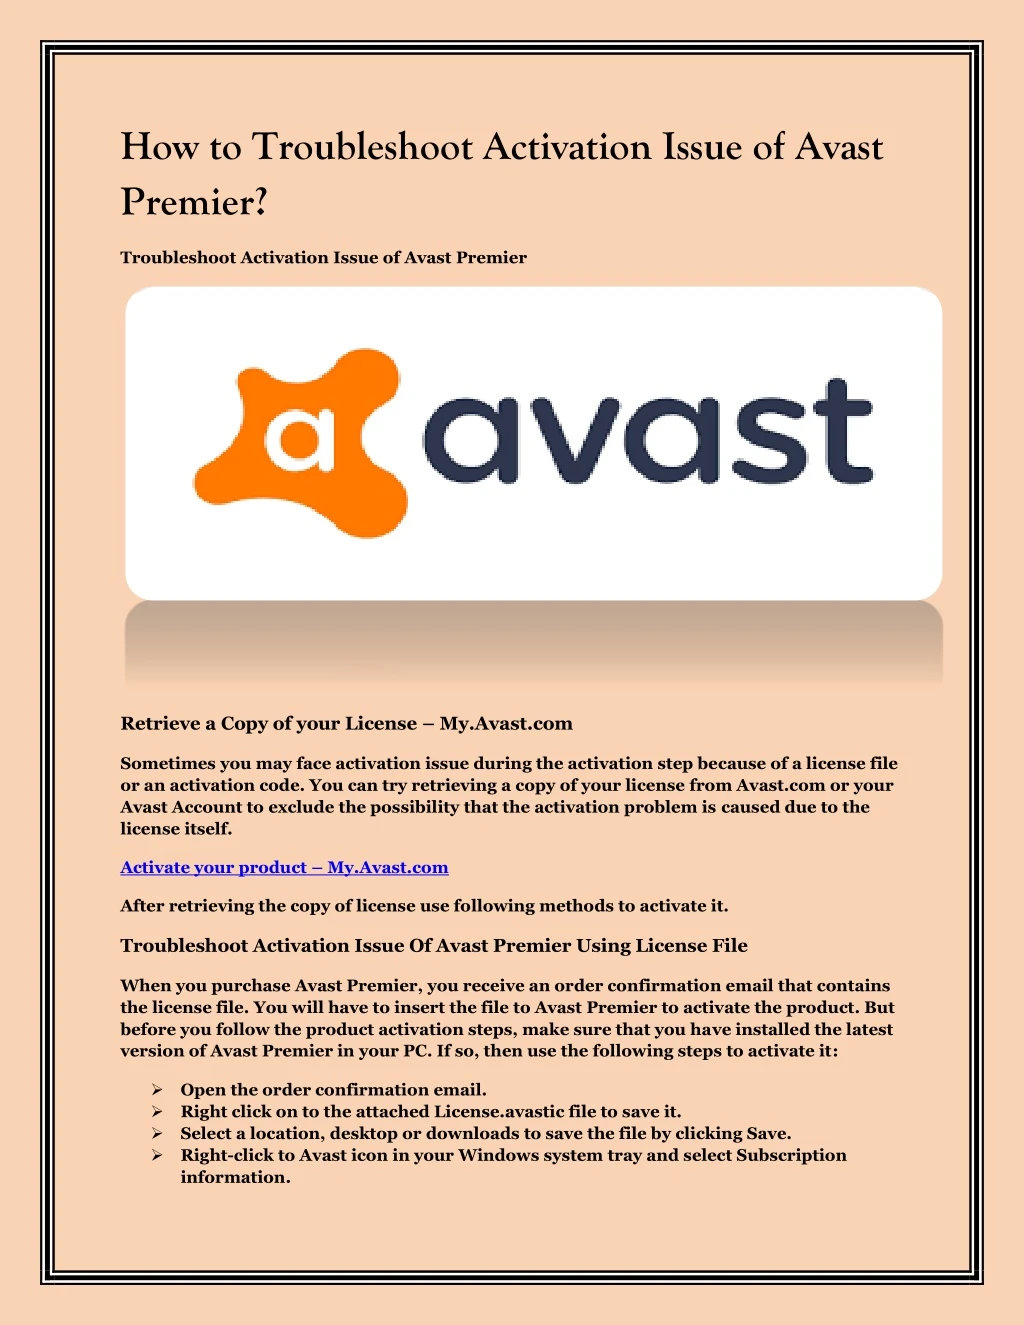 how to troubleshoot activation issue of avast